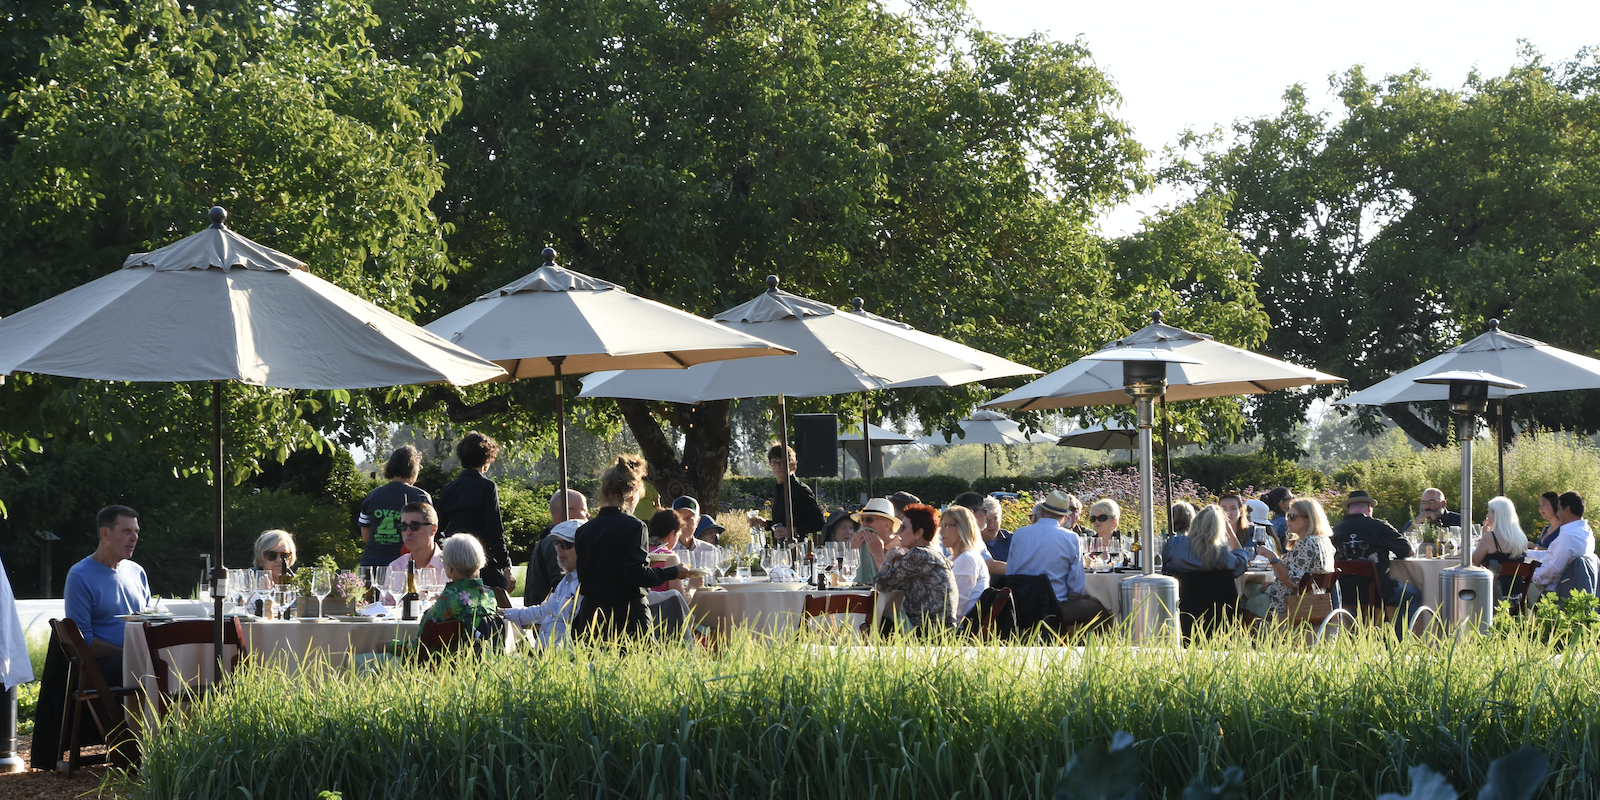 Outdoor tables under umbrellas at Kendall-Jackson Wine Estates' Farm-to-Table Summer Supper Series in Sonoma, California